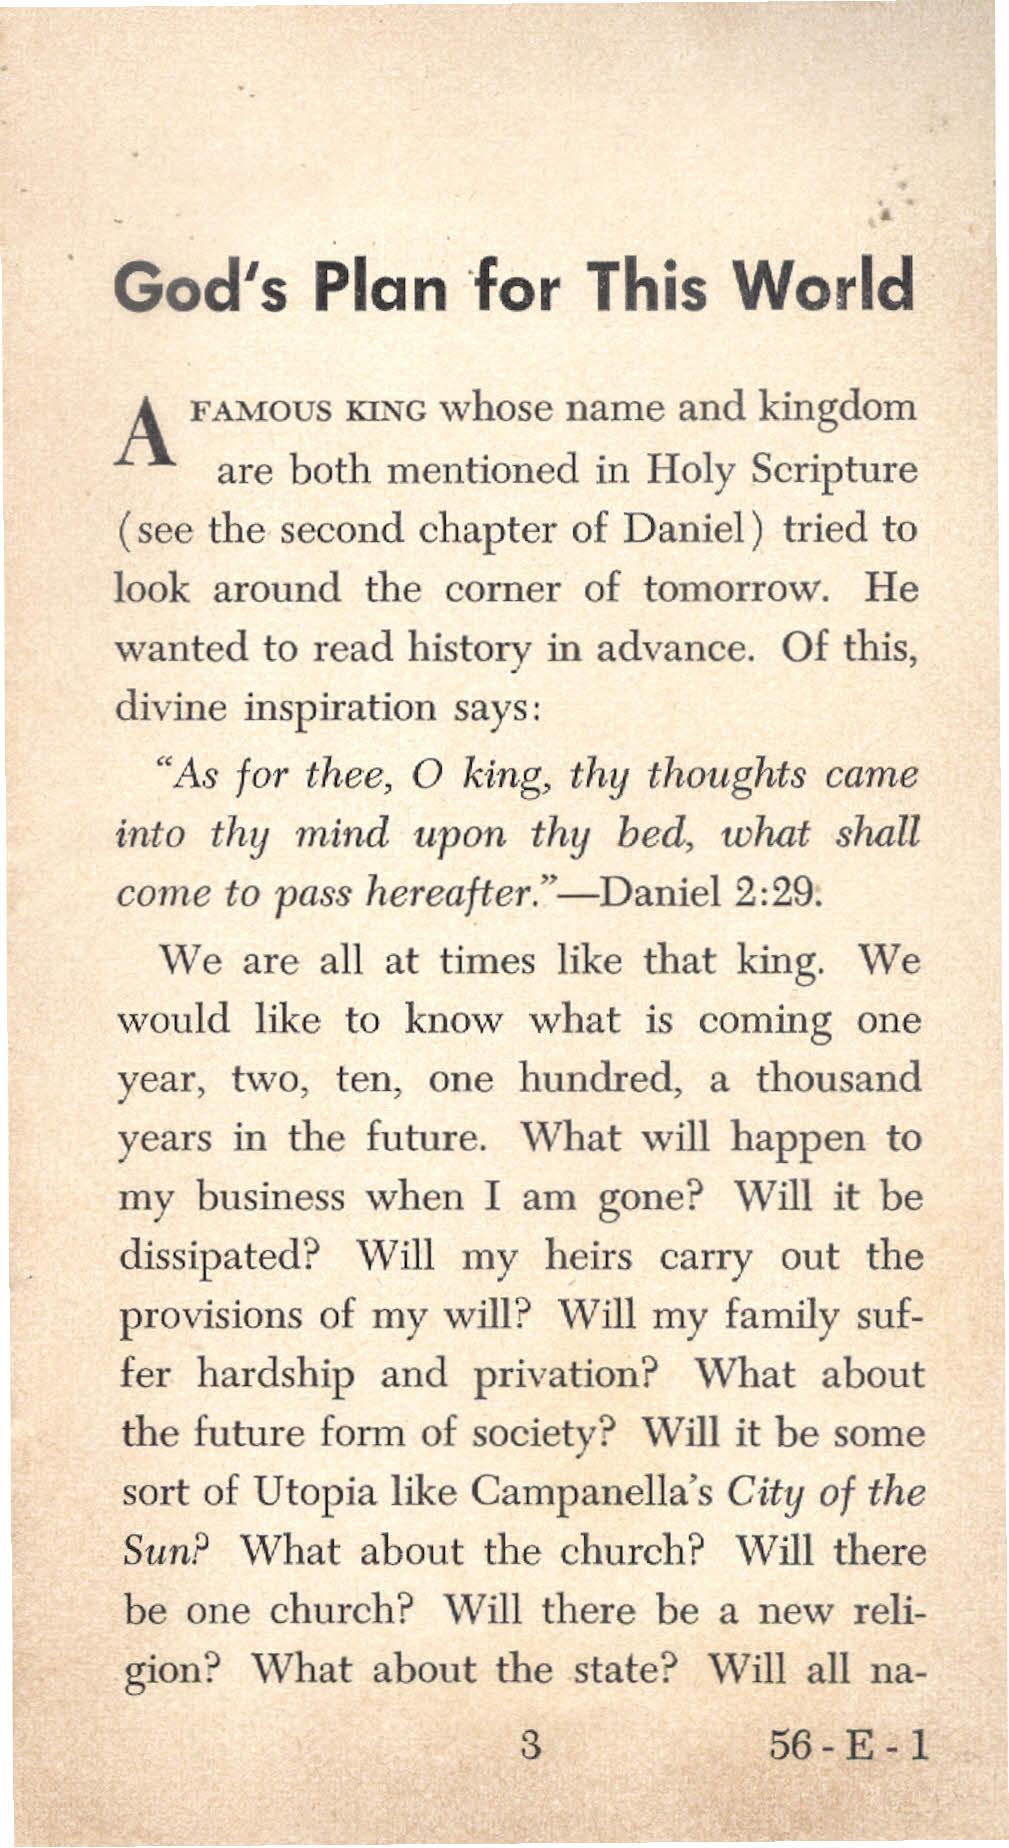 God's Plan 'for This World A FAMOUS KING whose name and kingdom are both mentioned in Holy Scripture (see the second chapter of Daniel) tried to look around the corner of tomorrow.